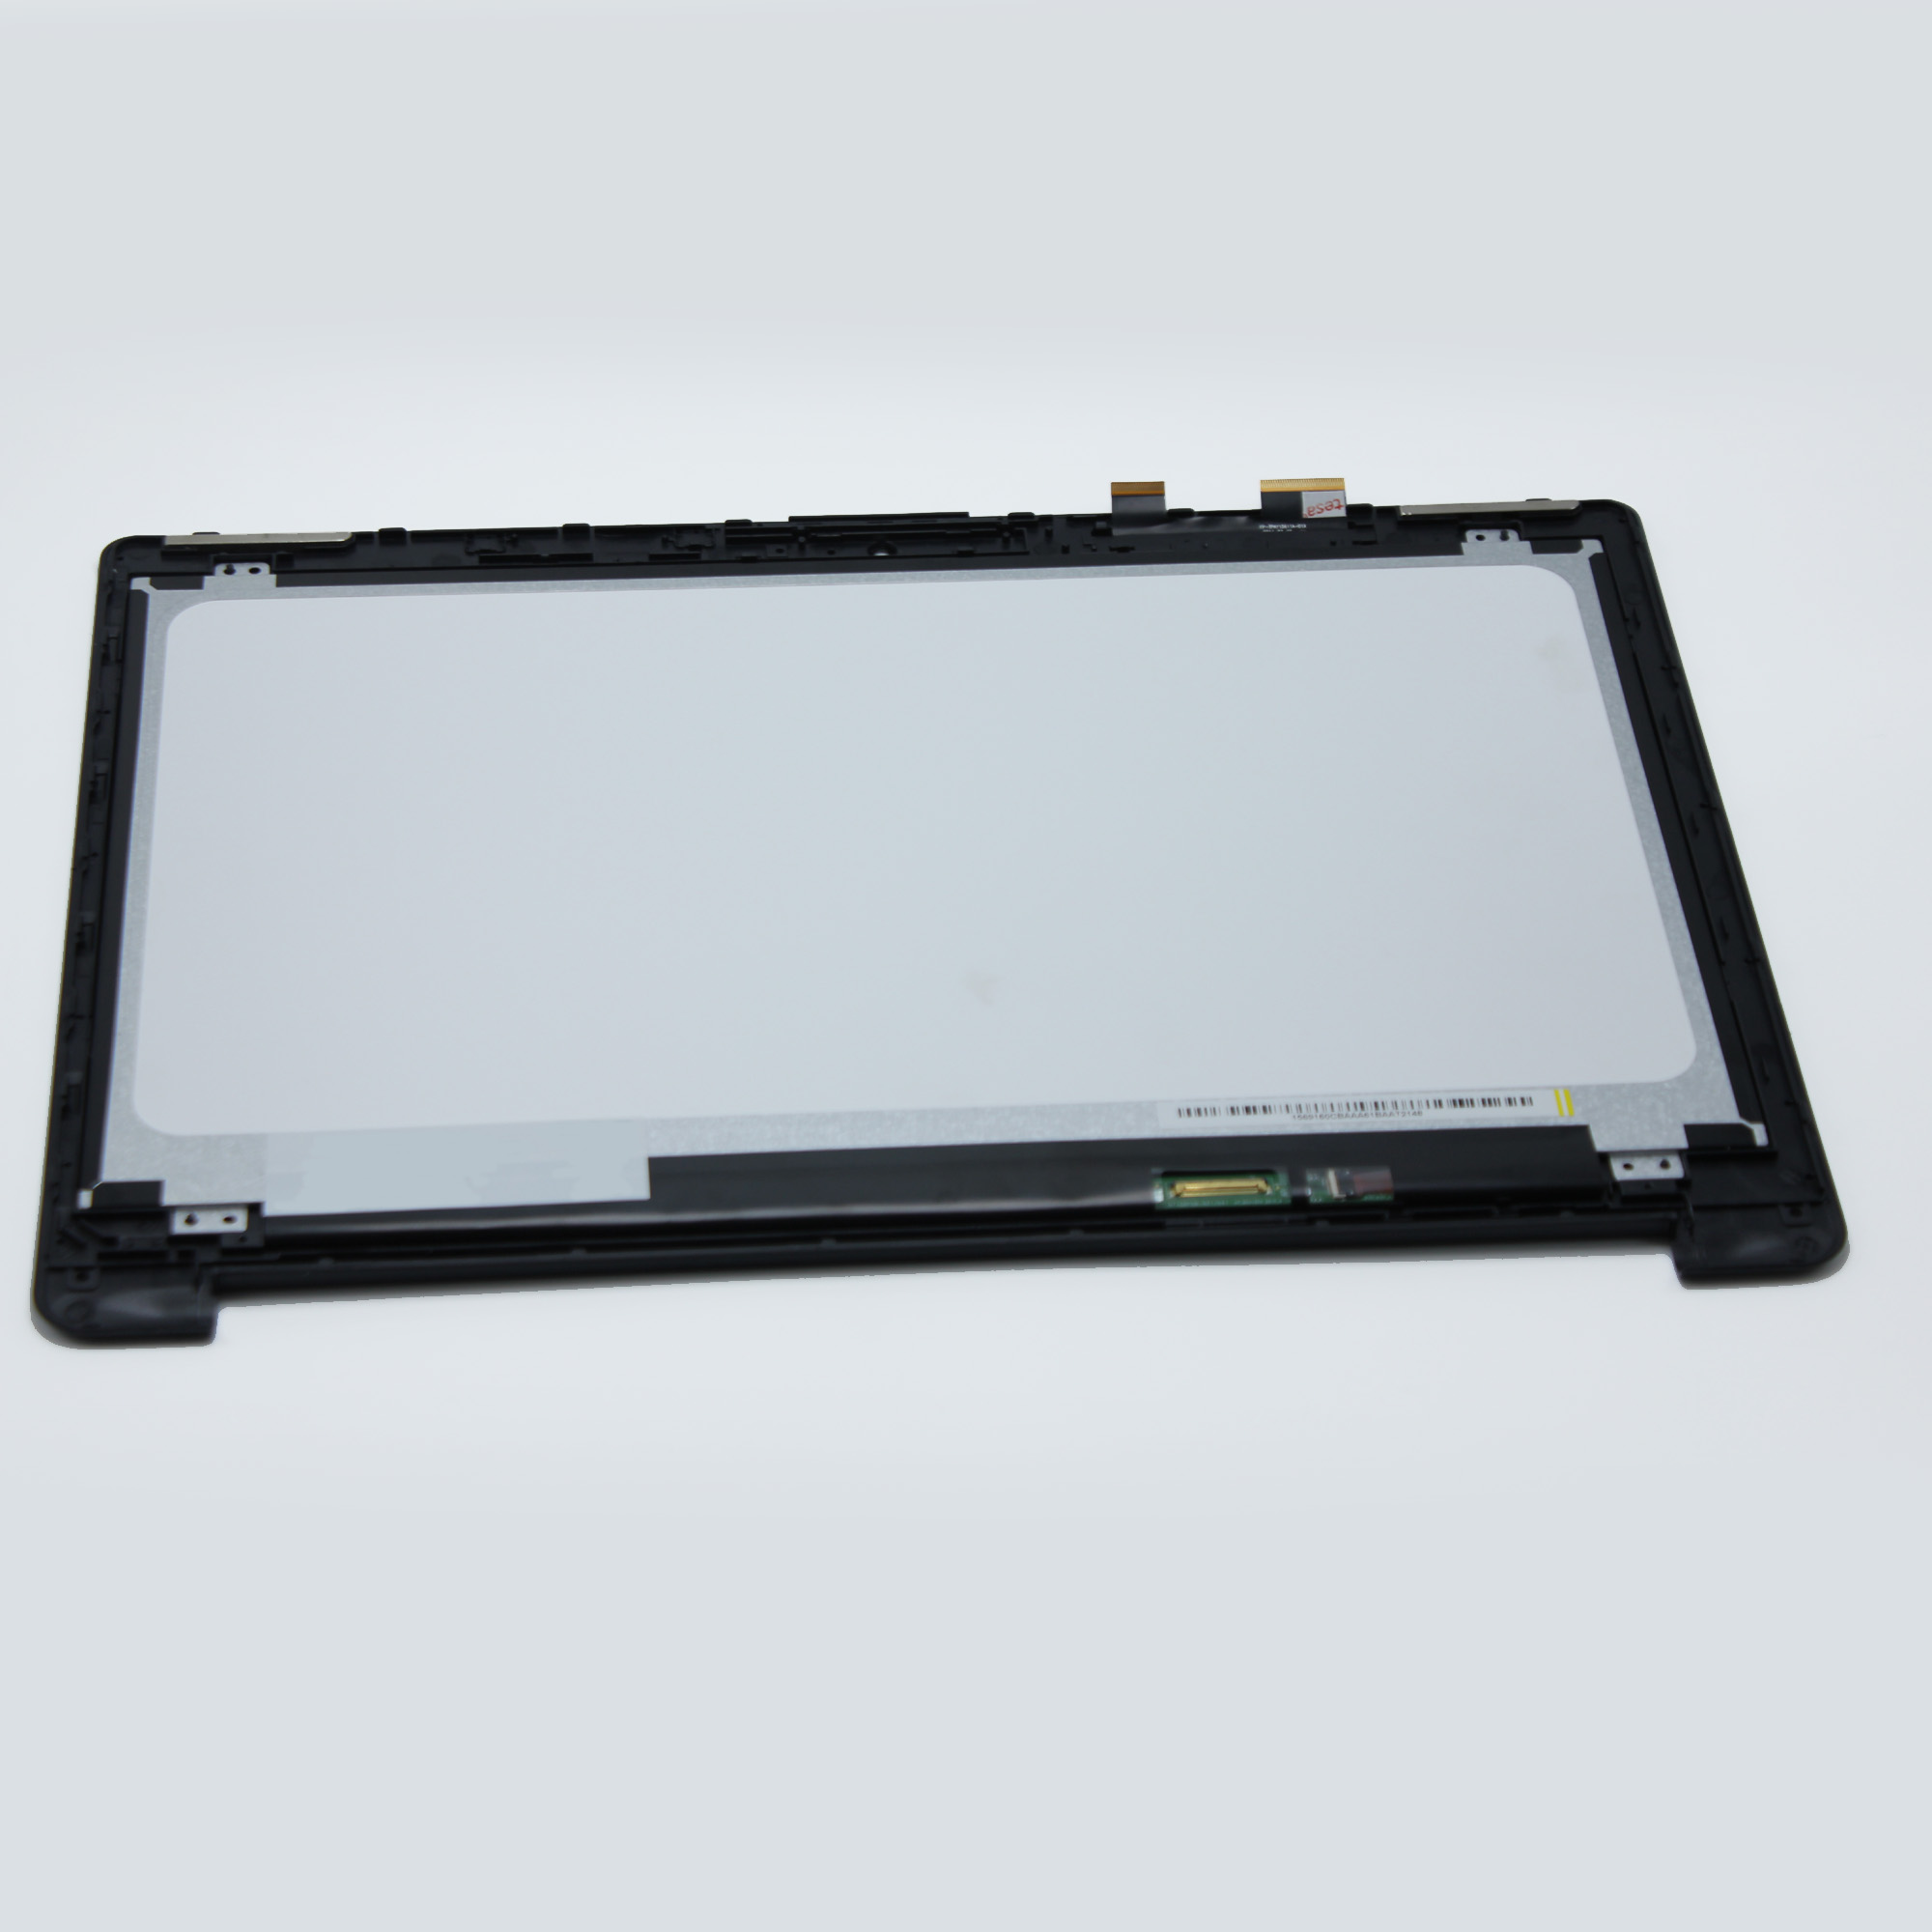 15.6'' LCD Touch Screen Assembly for Asus Q551 Q551L Q551LA FP-TPAY15611A-01X